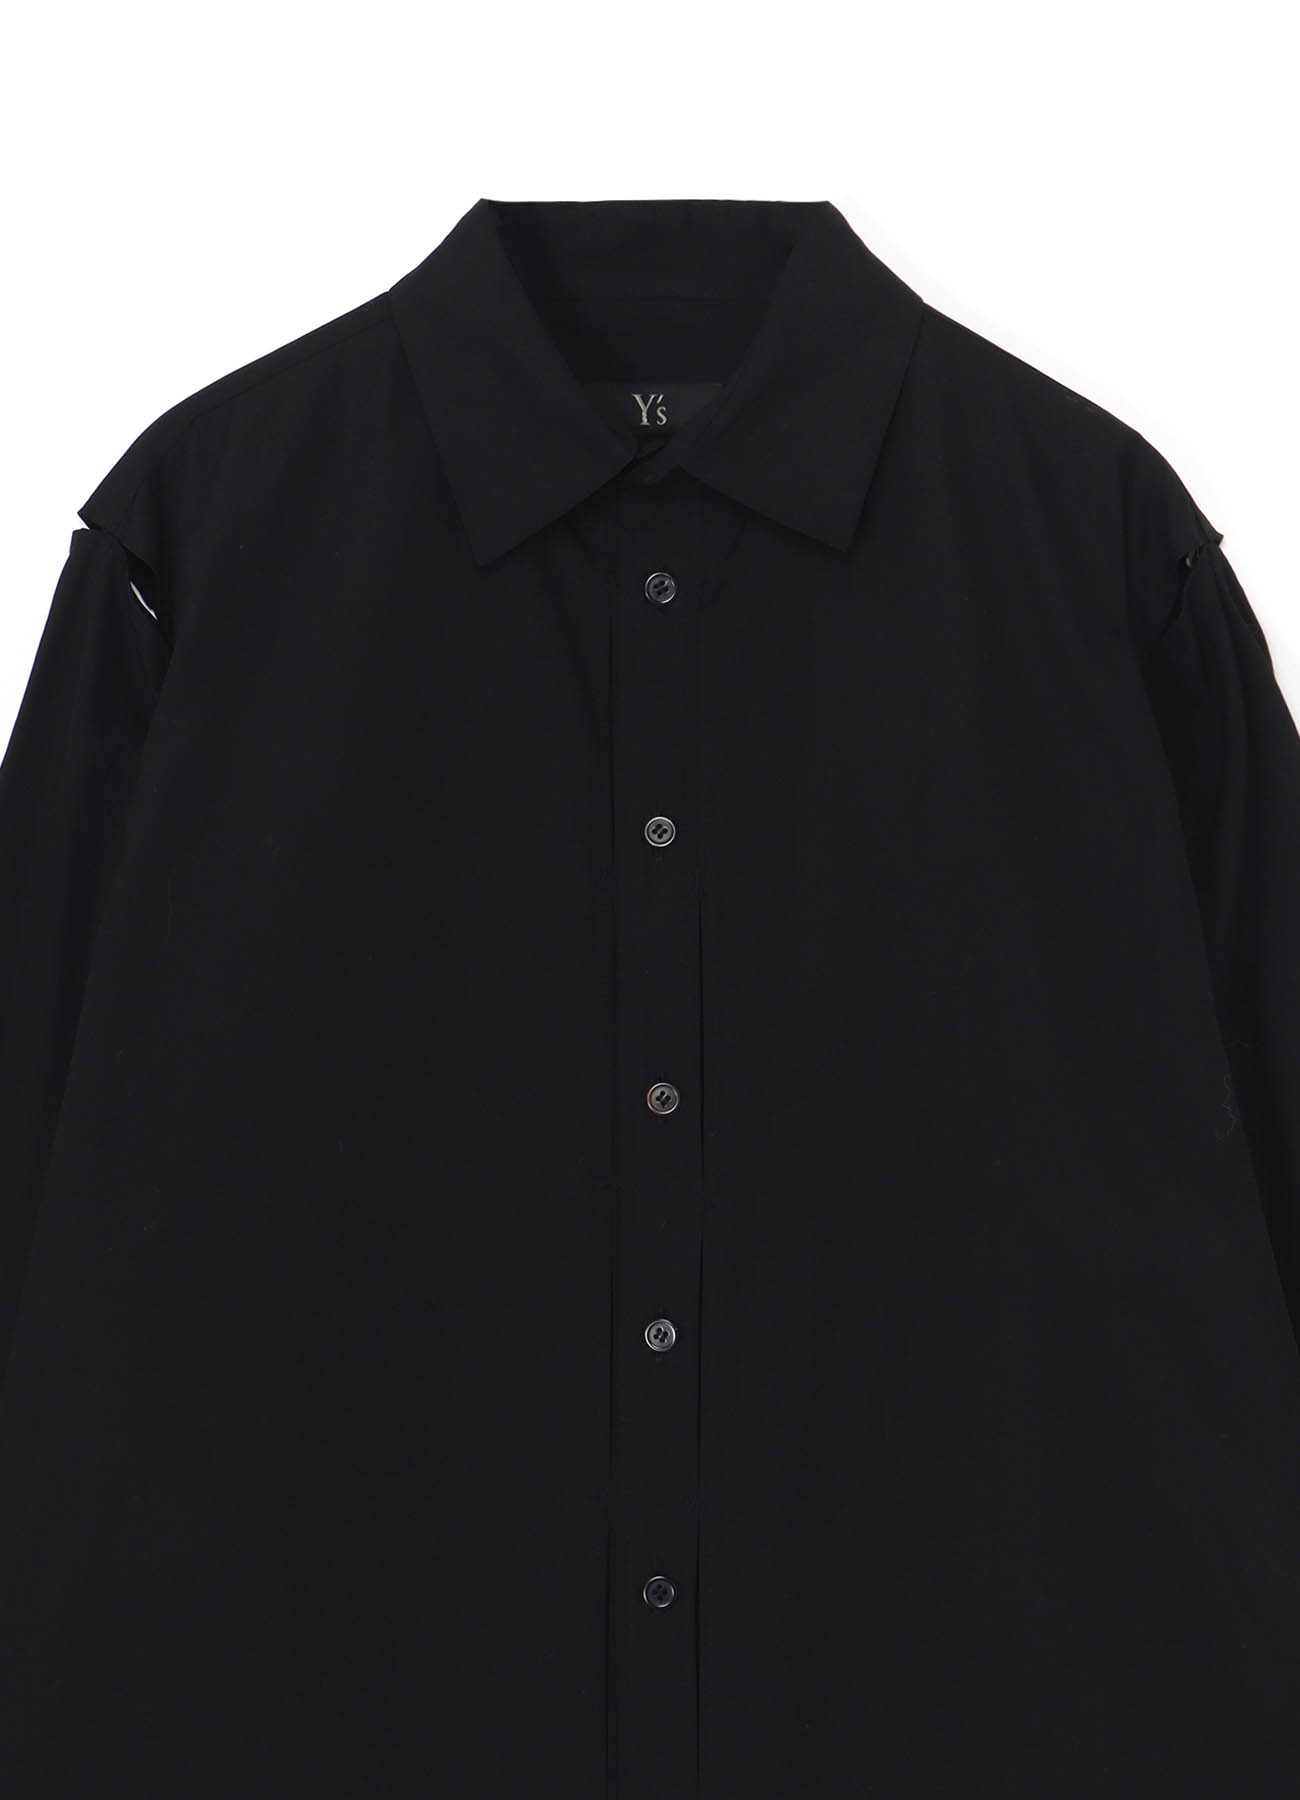 COTTON BROADCLOTH DECONSTRUCTED SLEEVE DETAIL SHIRT